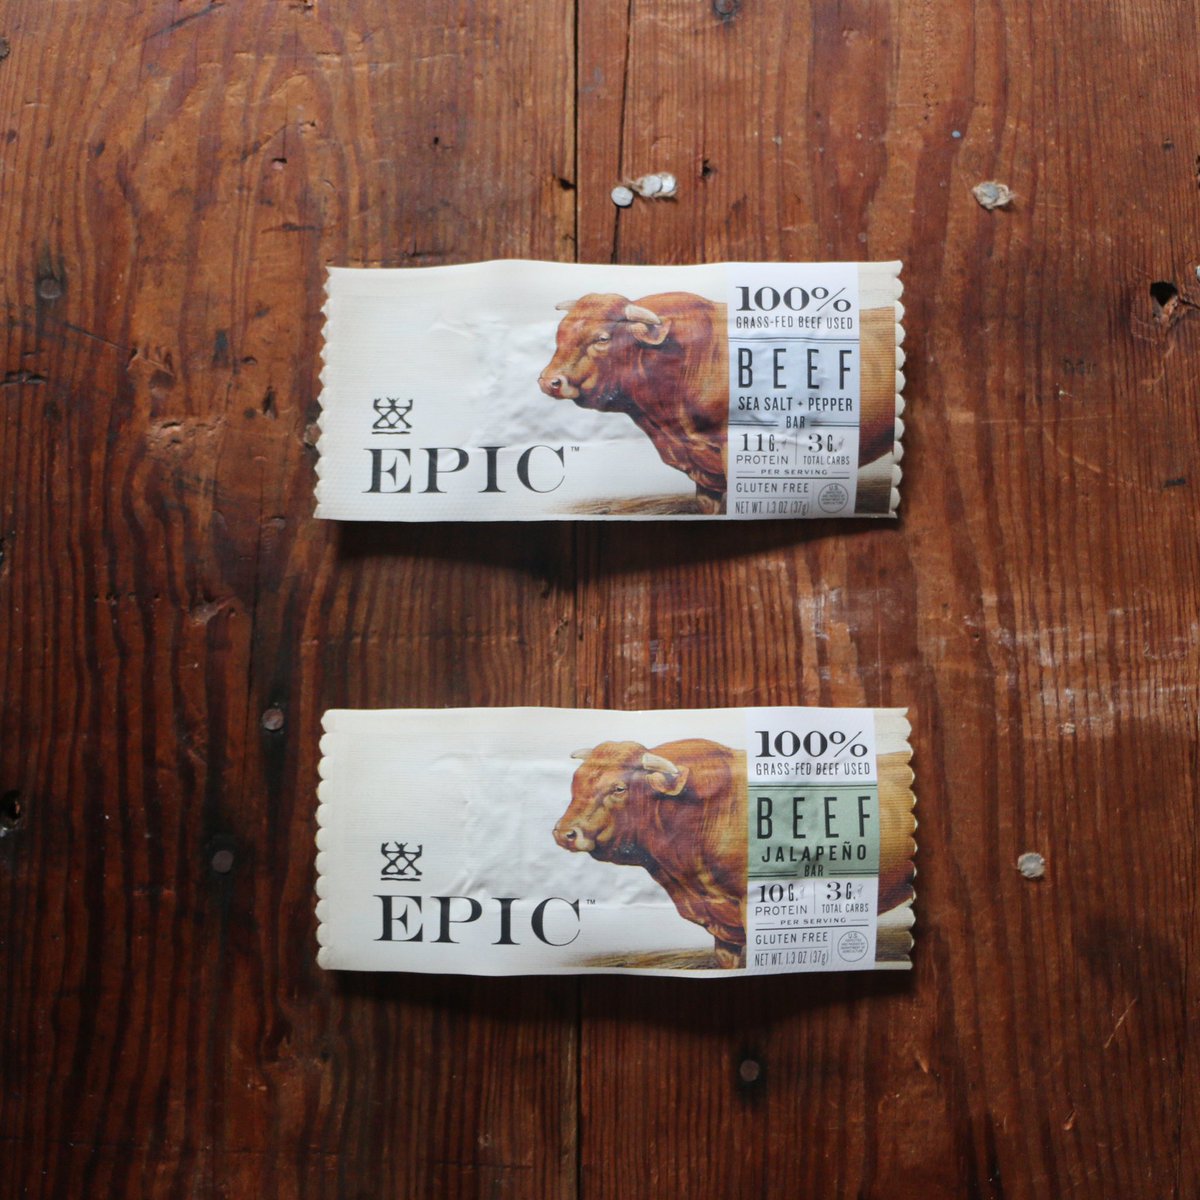 🚨 NEW PRODUCT ALERT 🚨 We’re proud to introduce the two newest additions to the EPIC bar line: Beef Sea Salt & Pepper and Beef Jalapeño—made with 100% grass-fed beef and a custom blend of spices. Now available on epicprovisions.com